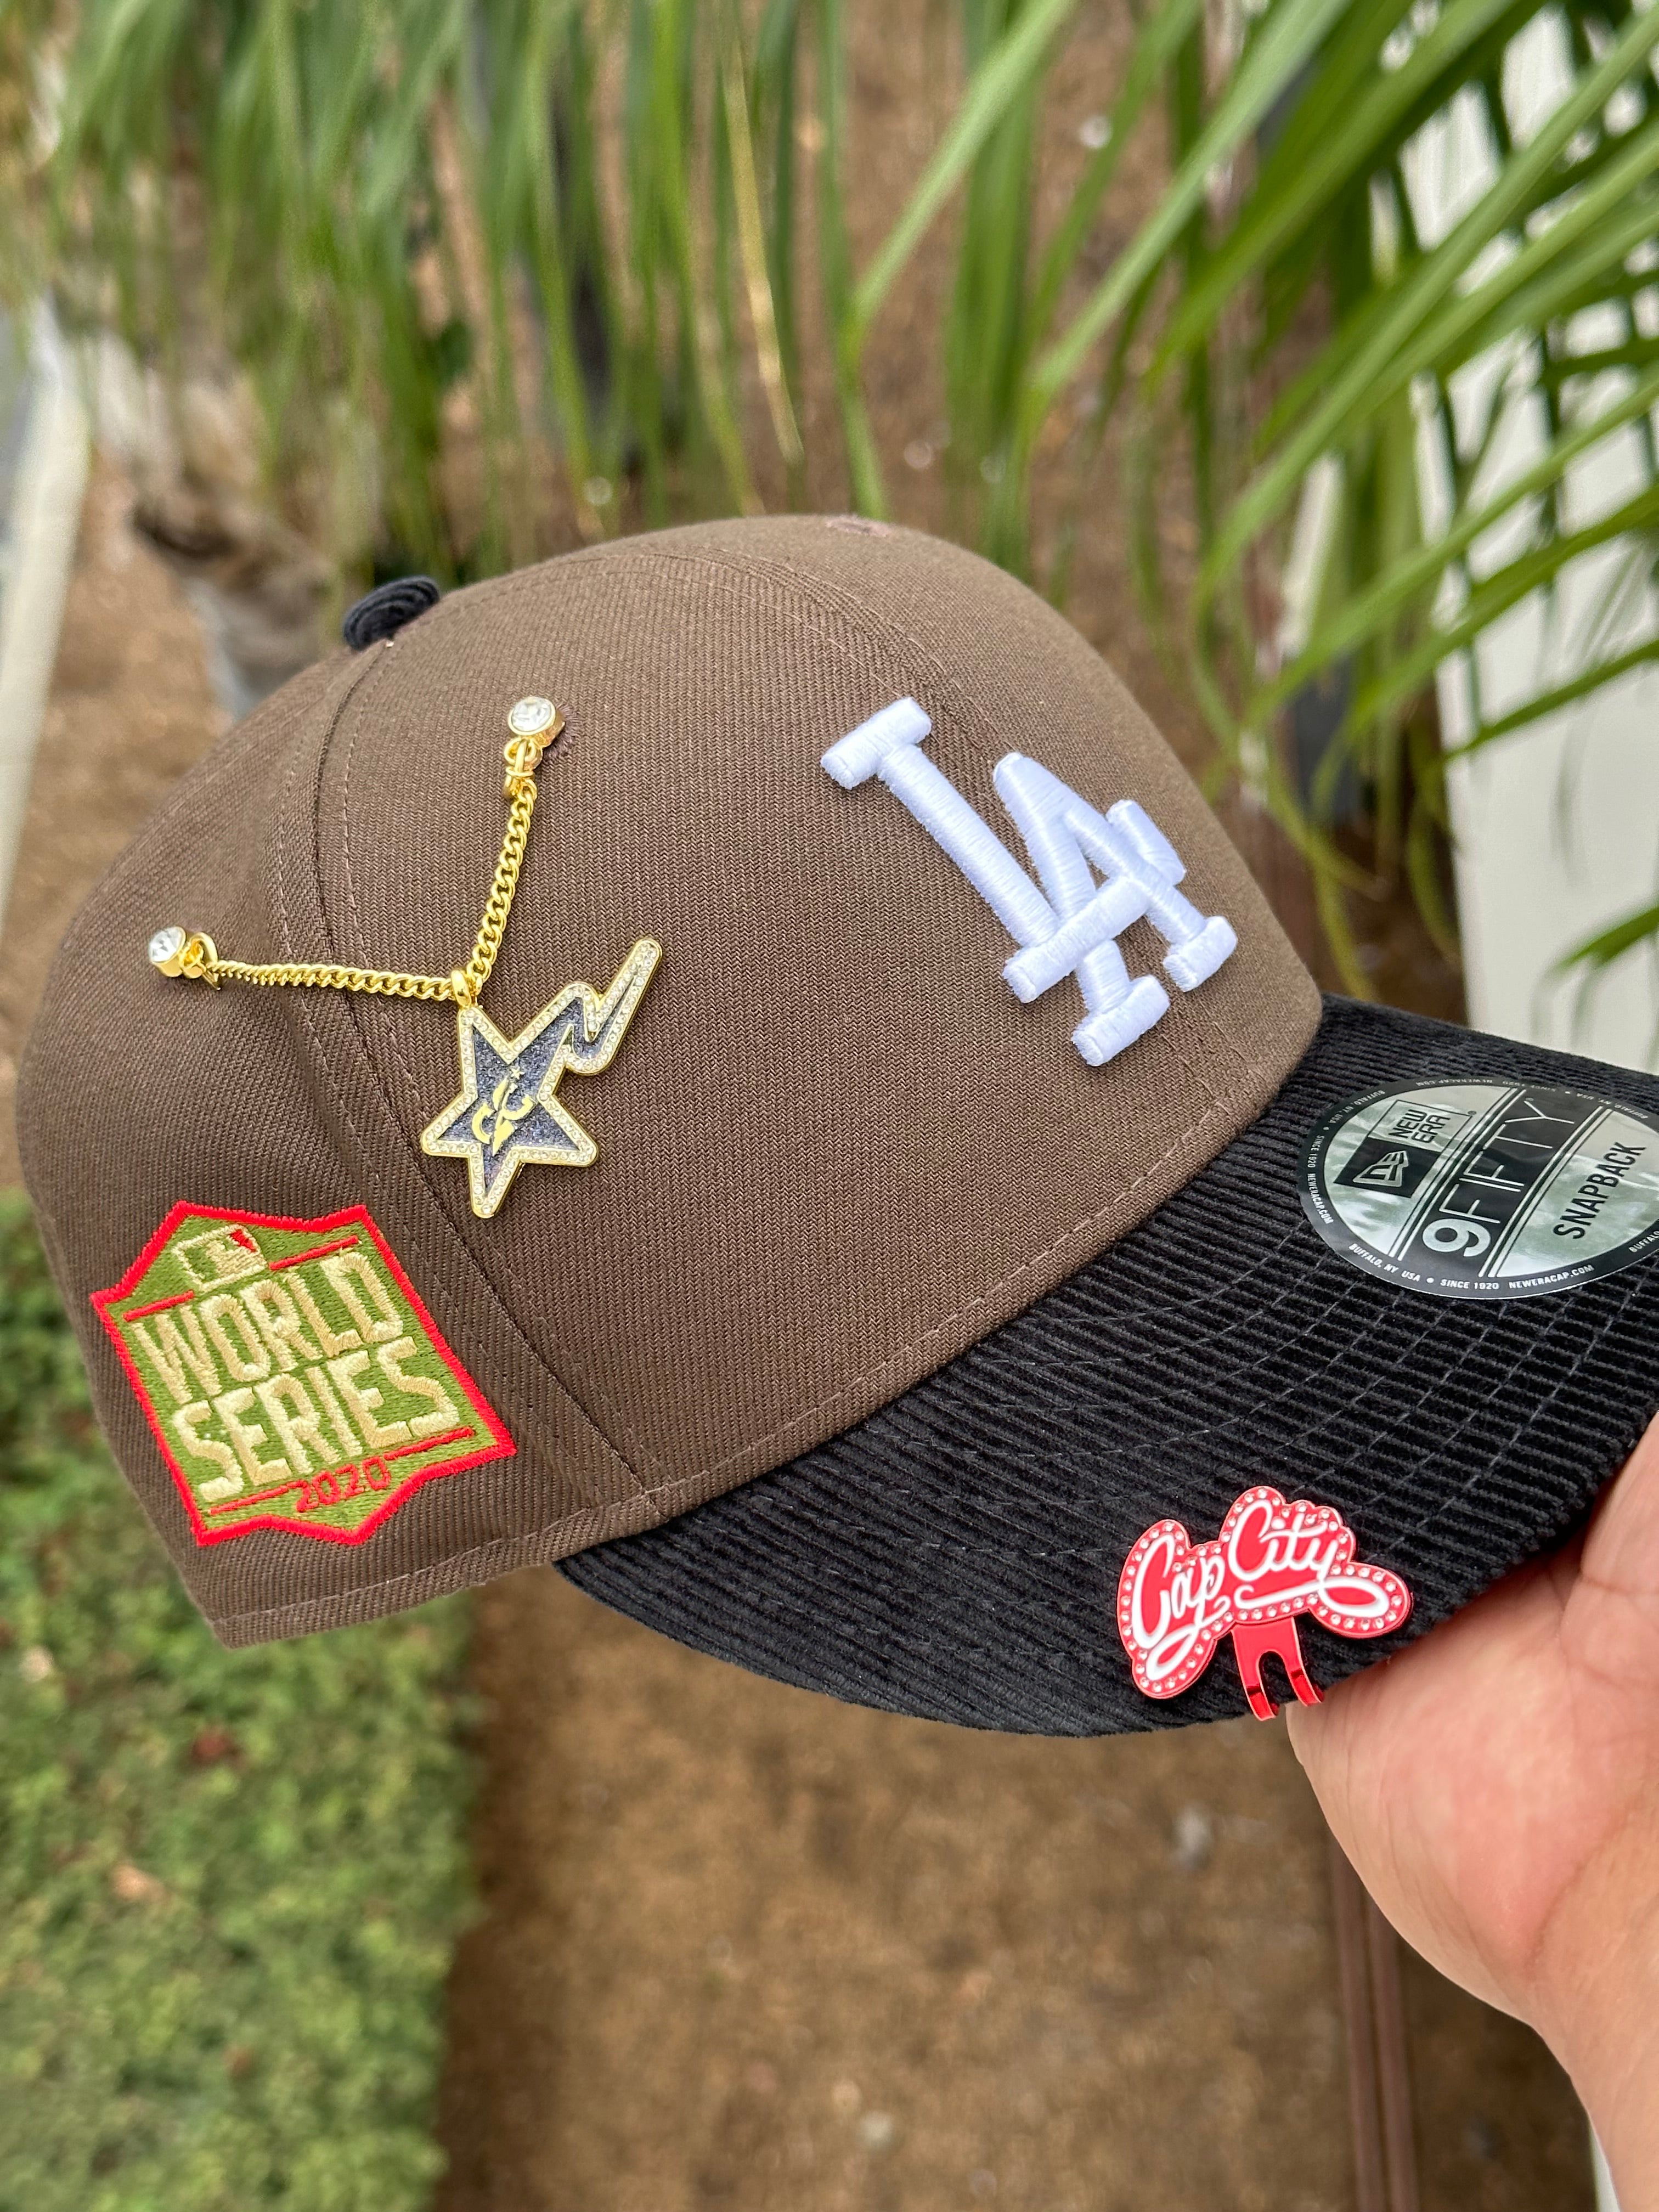 NEW ERA EXCLUSIVE 9FIFTY MOCHA/CORDUROY LOS ANGELES DODGERS TWO TONE SNAPBACK W/ 2020 WORLD SERIES PATCH